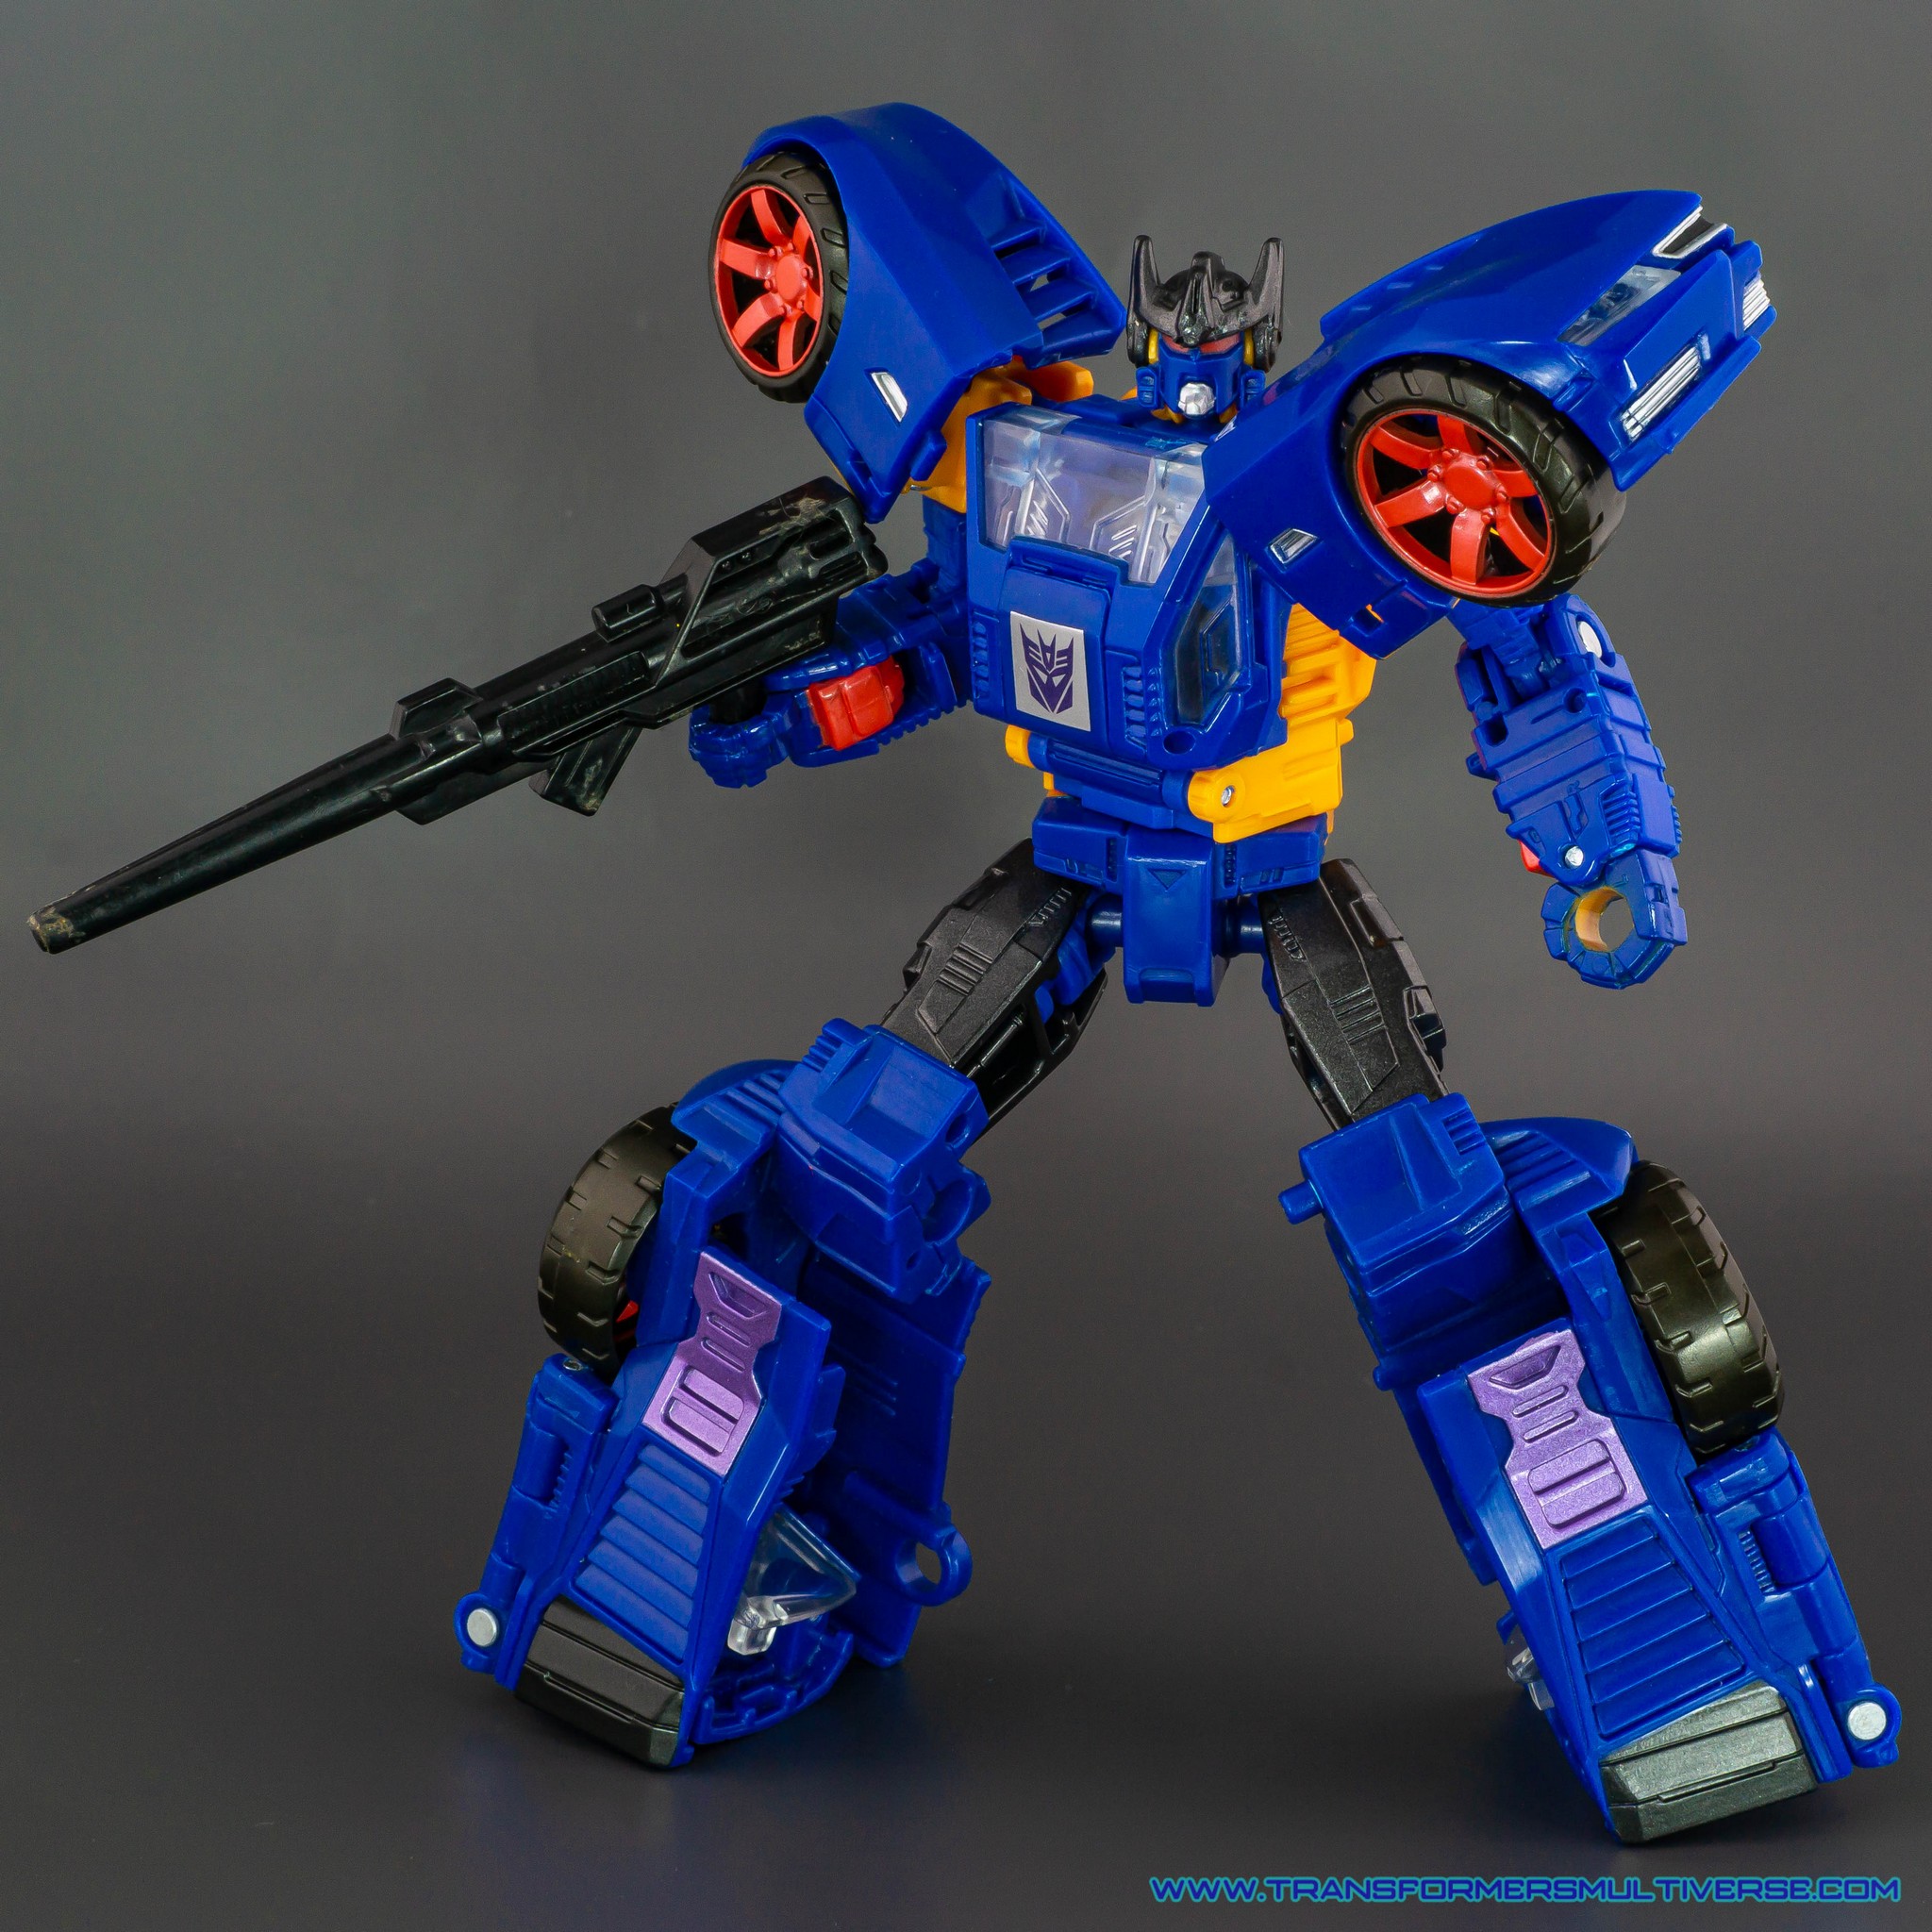 Transformers Power of the Primes Counterpunch robot mode with Generation 1 gun